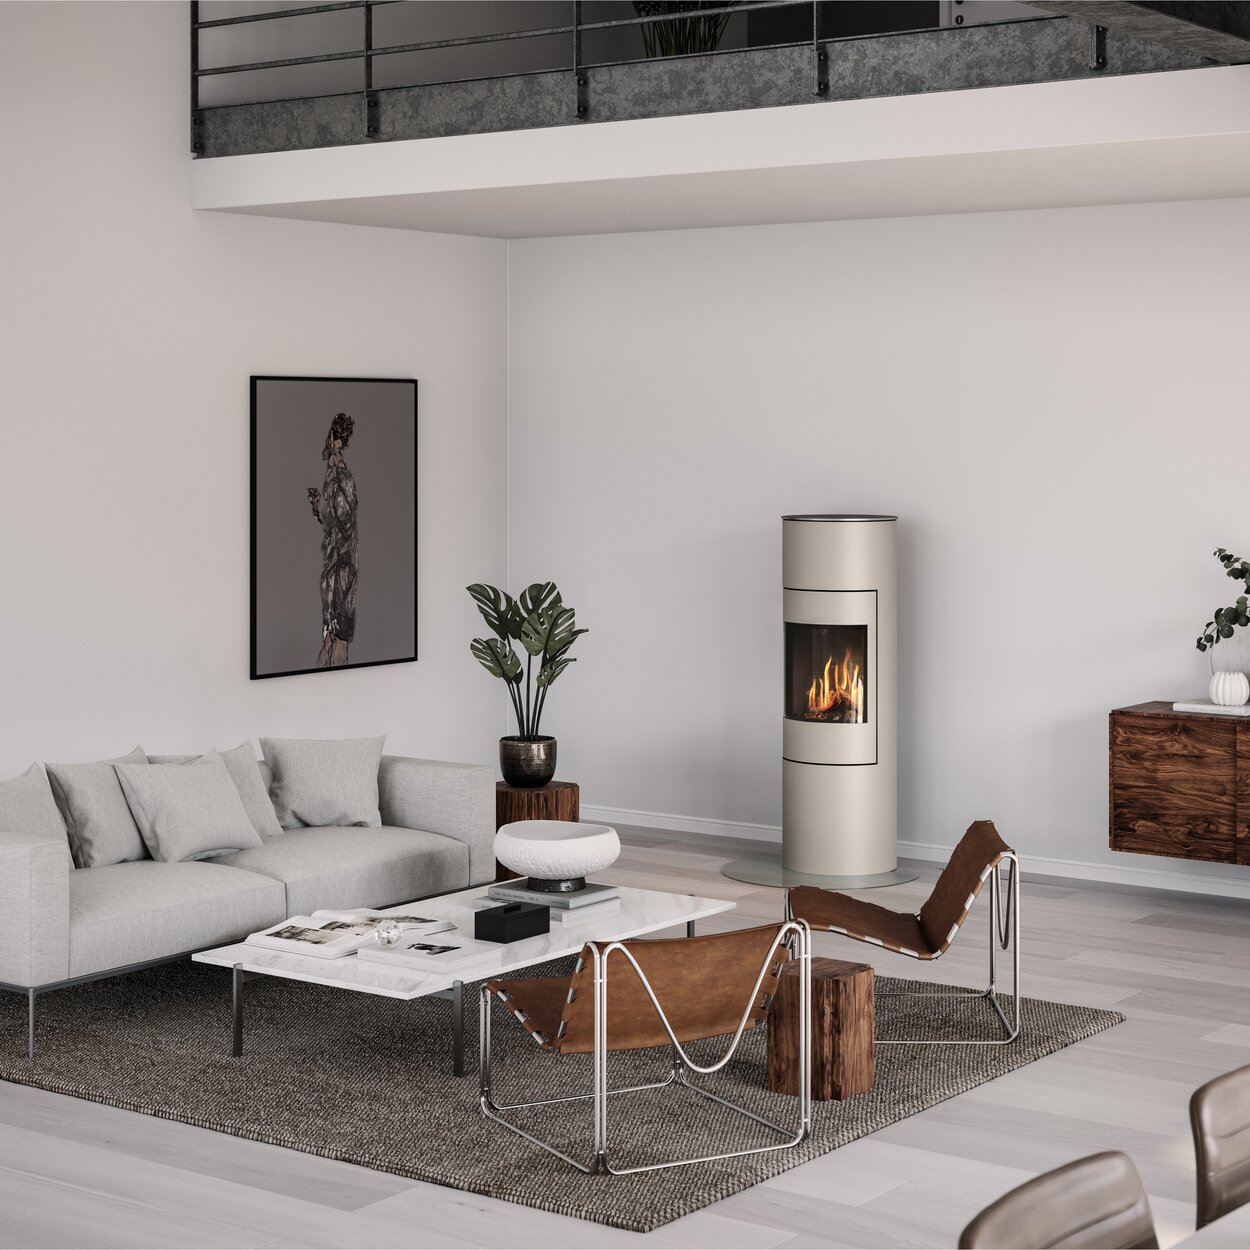 Gas stove VIVA 140 L in nickel with steel door in a stylish living room with grey-brown accents